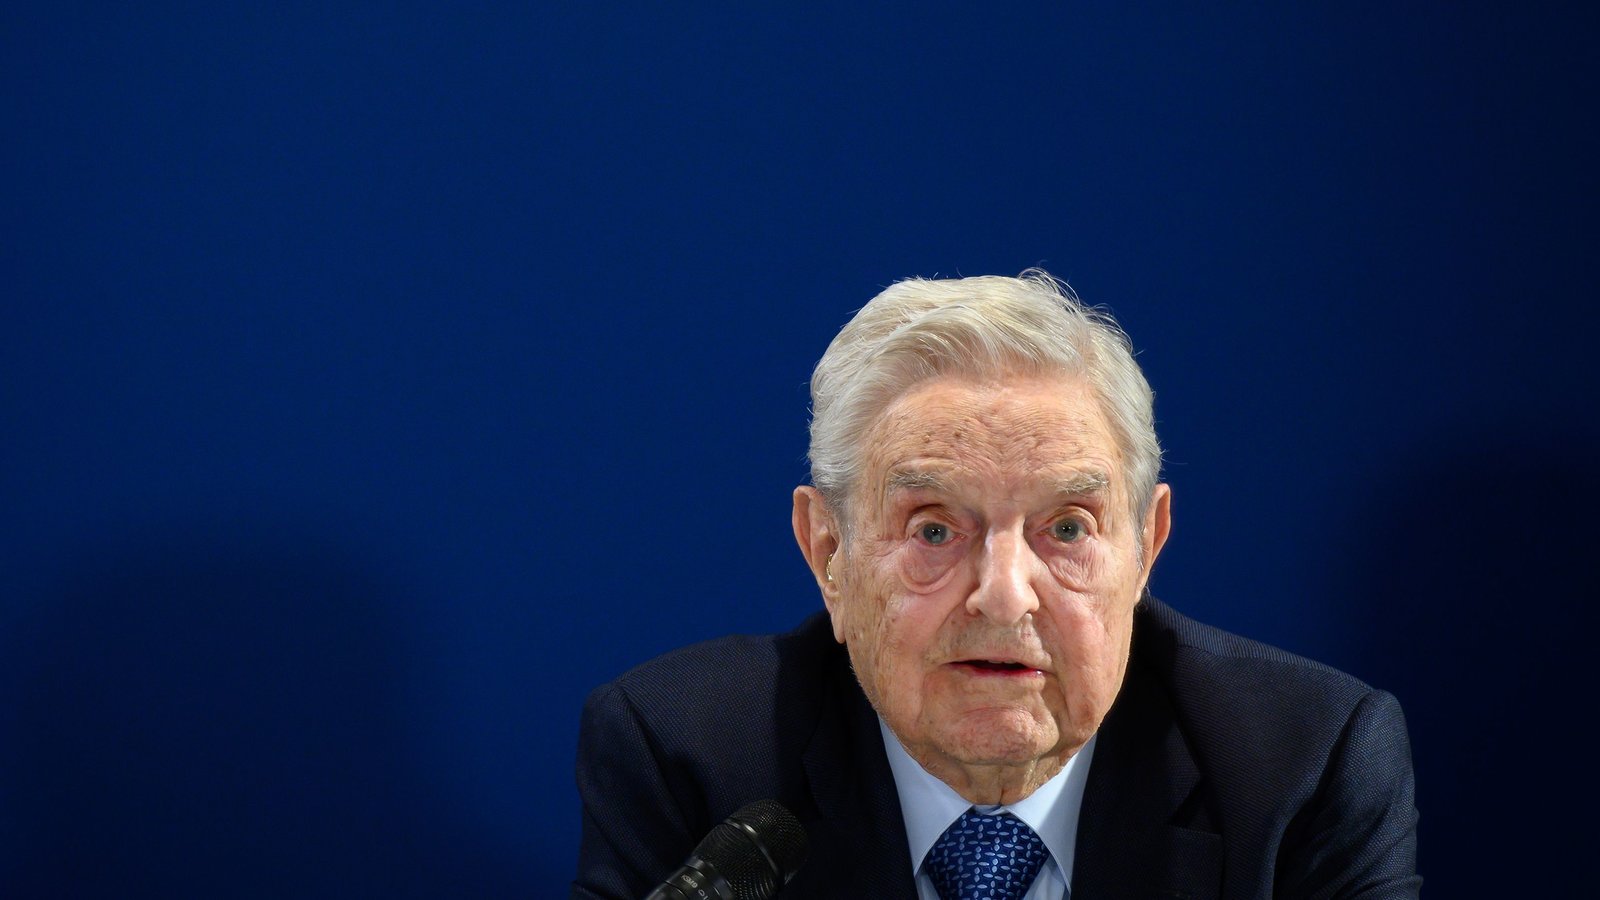 George Soros's Foundation Pours $220 Million Into Racial Equality Push